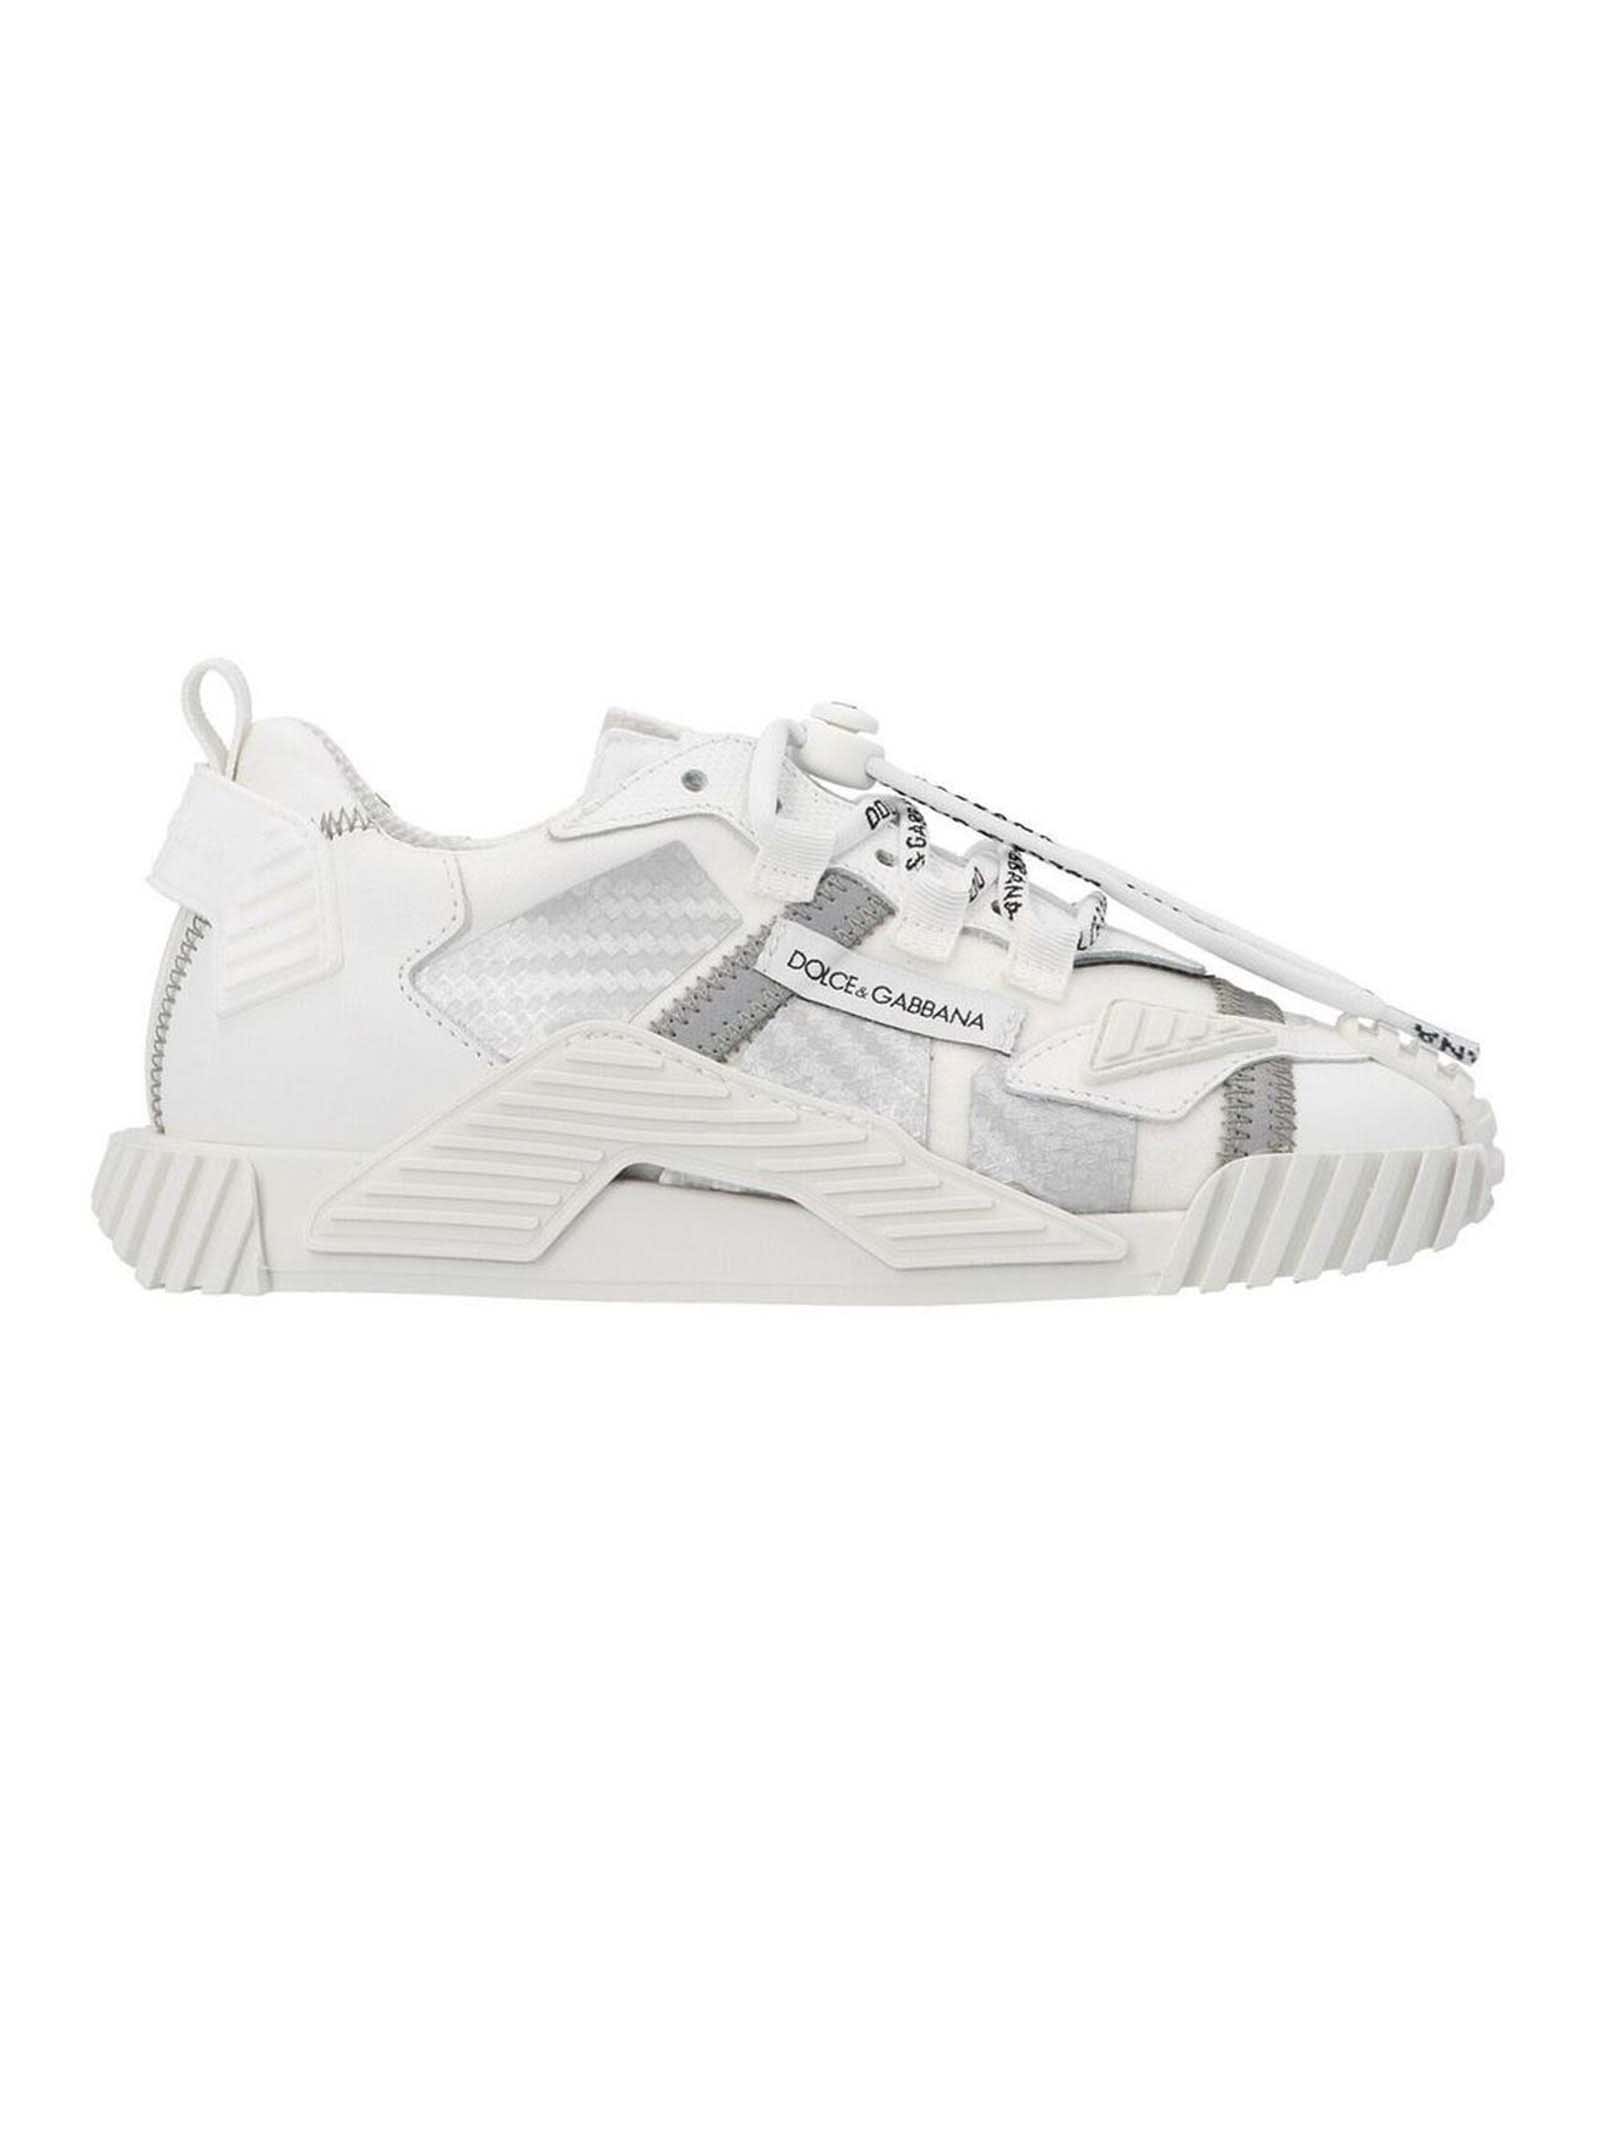 Dolce & Gabbana Reflective Fabric Ns1 Sneakers